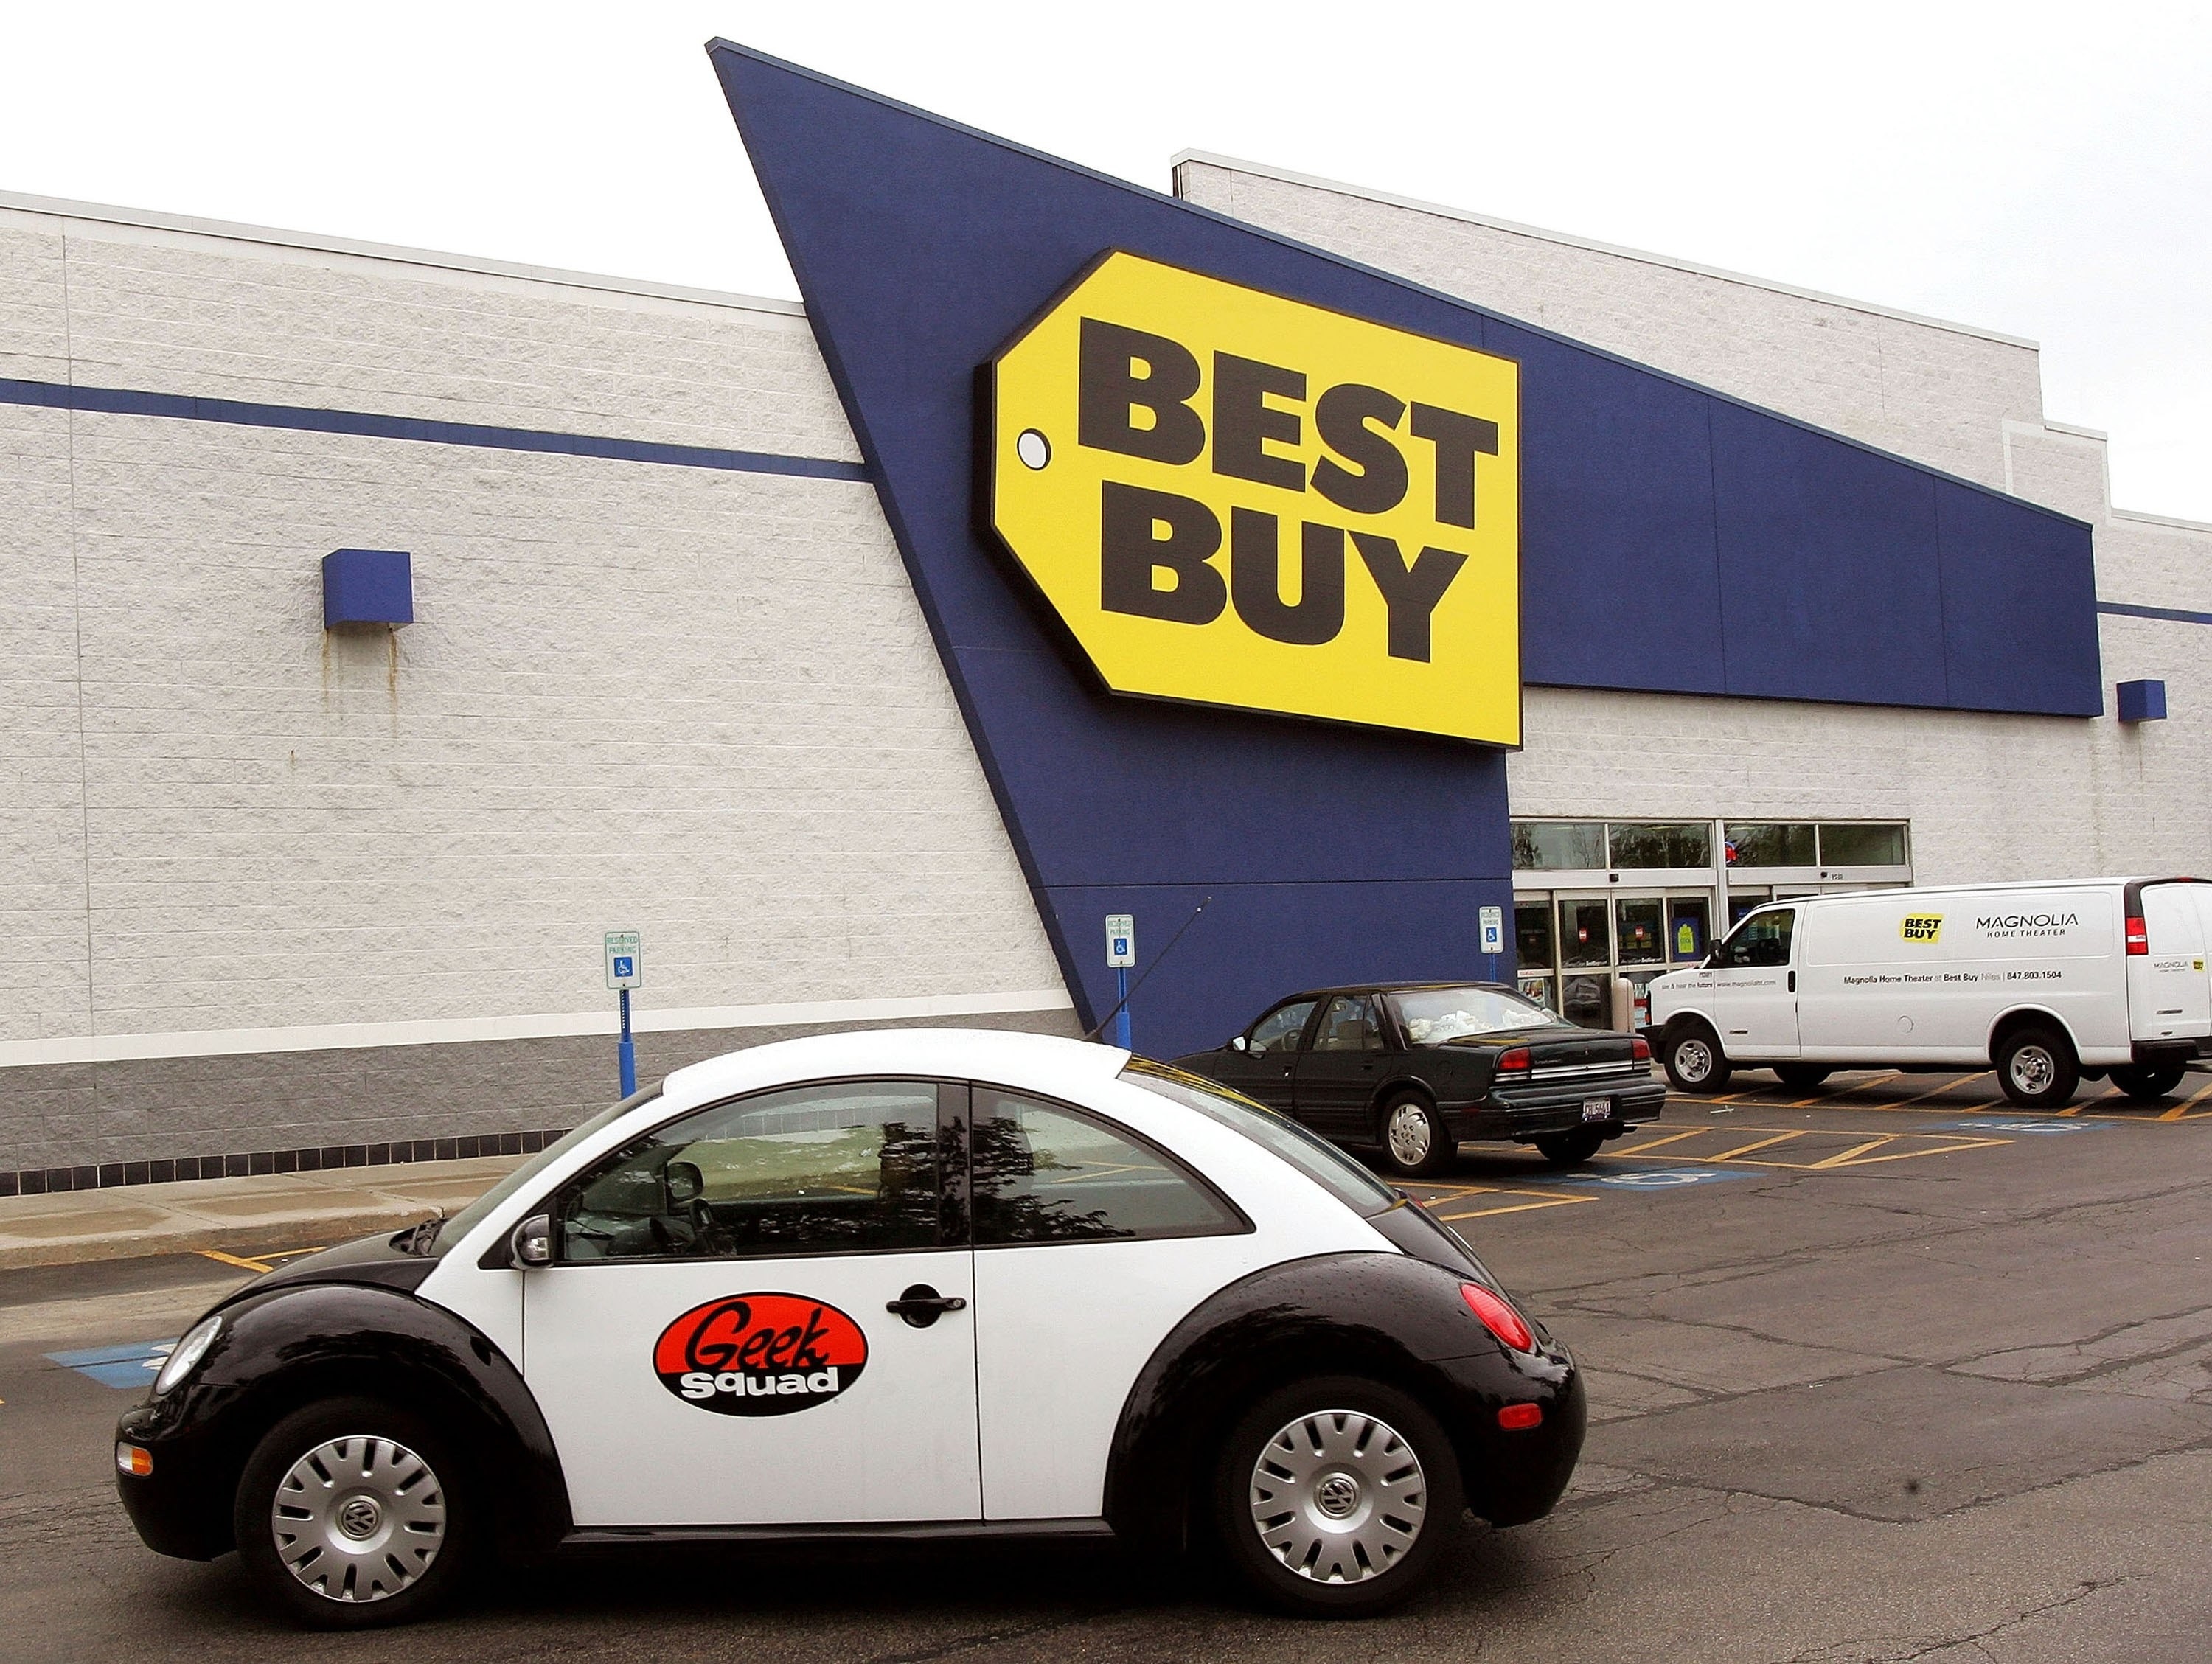 A black and white Geek Squad Volkswagen Beetle parked outside a Best Buy.